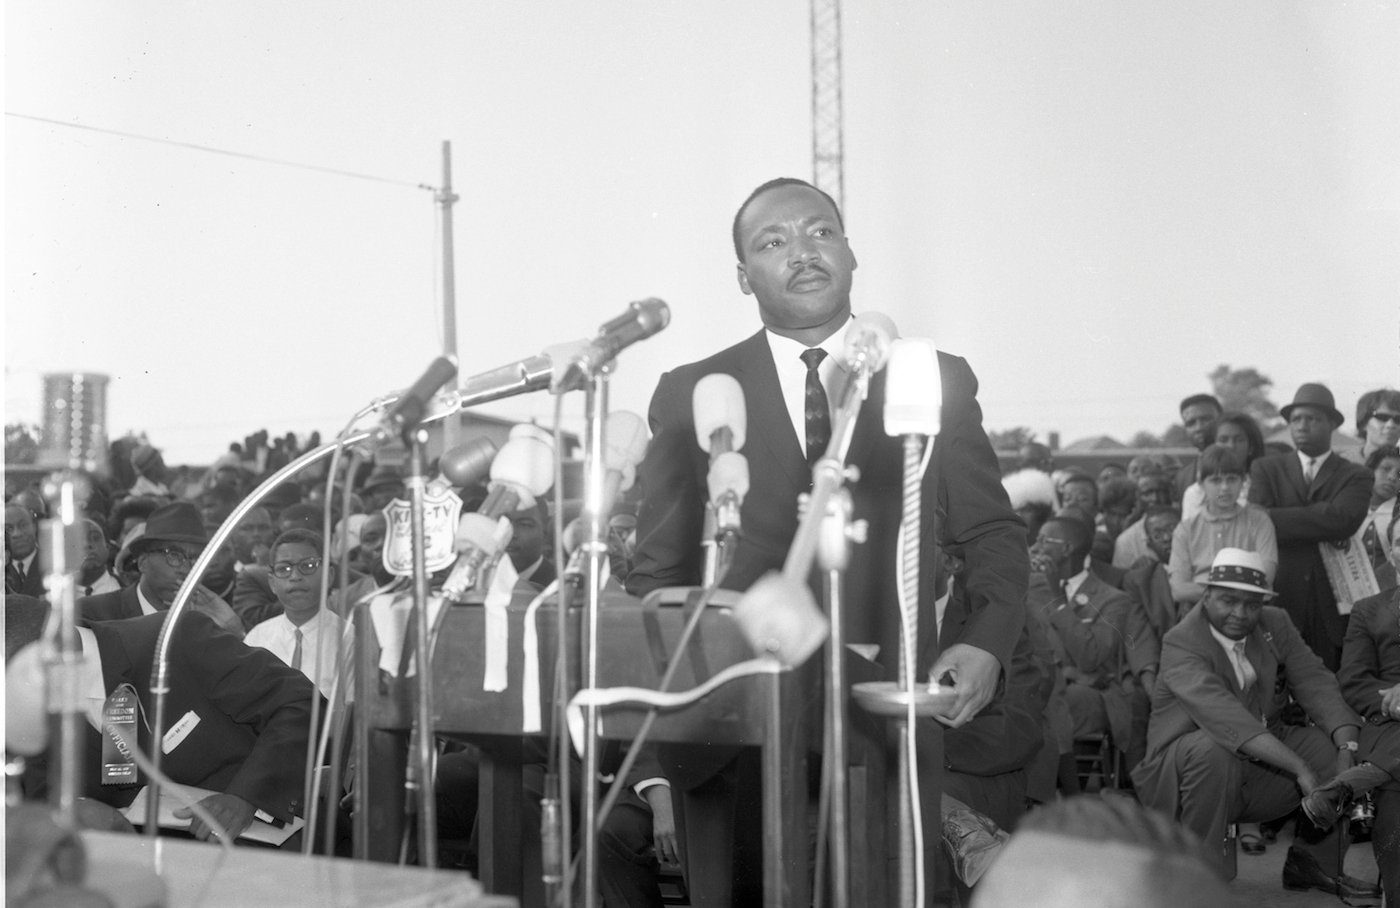 Dr. King in front of a variety of microphones at Freedom Rally, Wrigley Field, Los Angeles